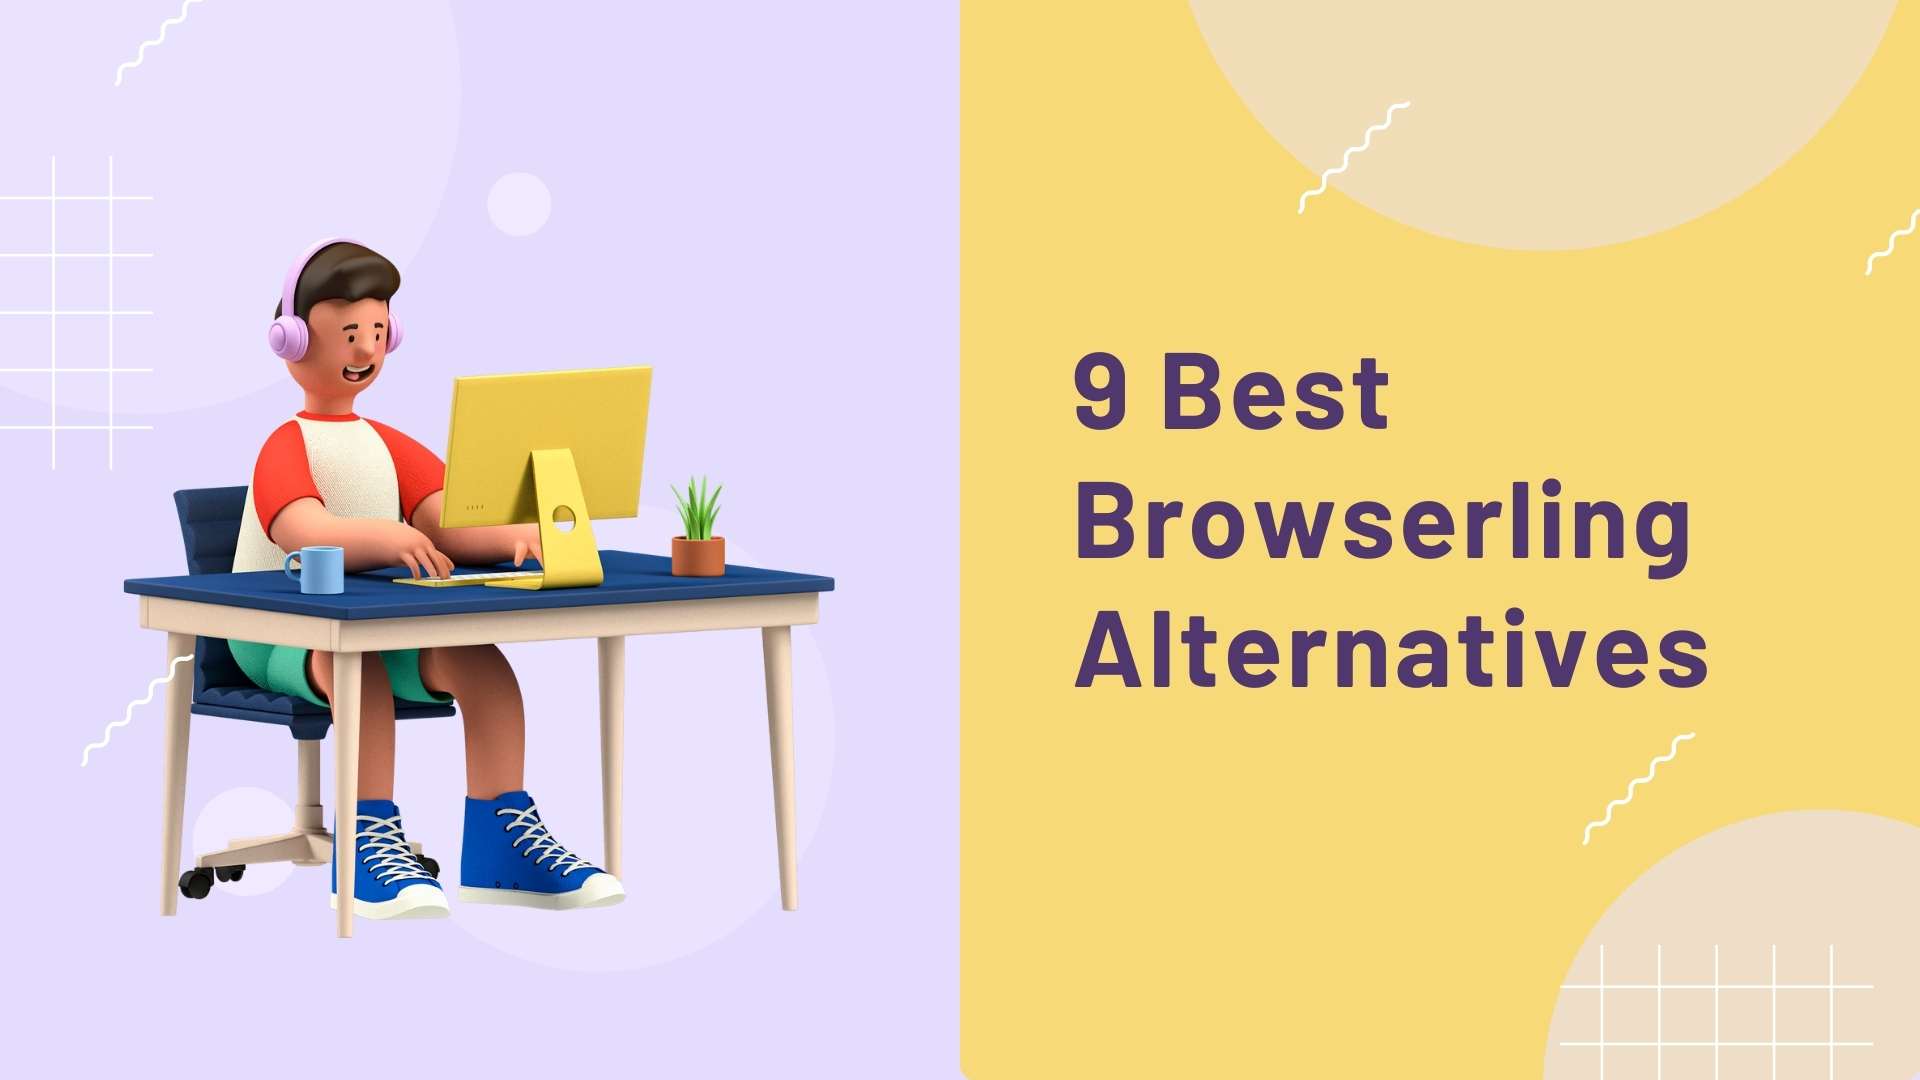 cover image of 9 Best Browserling Alternatives article